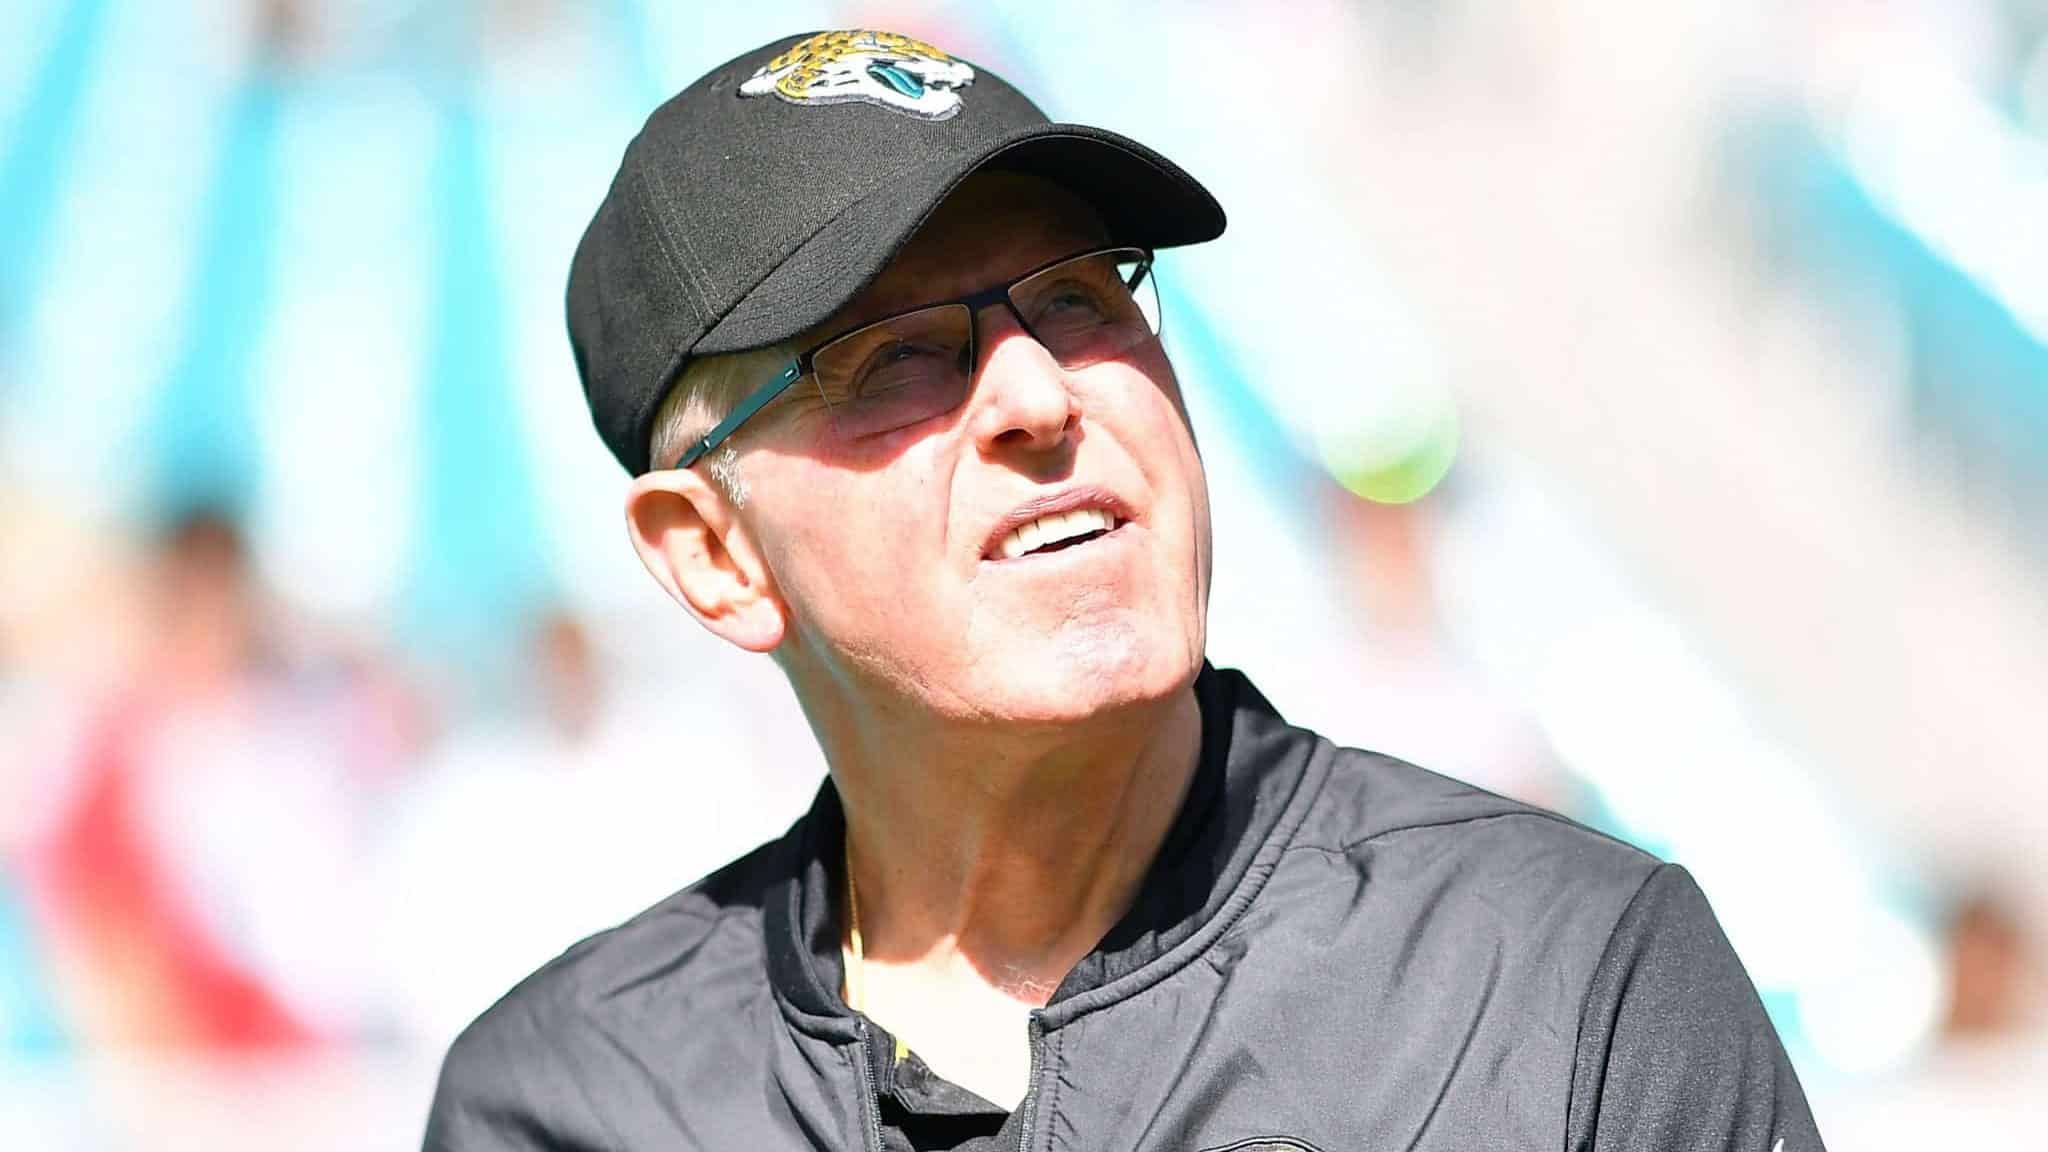 MIAMI, FLORIDA - DECEMBER 23: Executive vice president of football operations Tom Coughlin of the Jacksonville Jaguars looks on prior to their game against the Miami Dolphins at Hard Rock Stadium on December 23, 2018 in Miami, Florida.